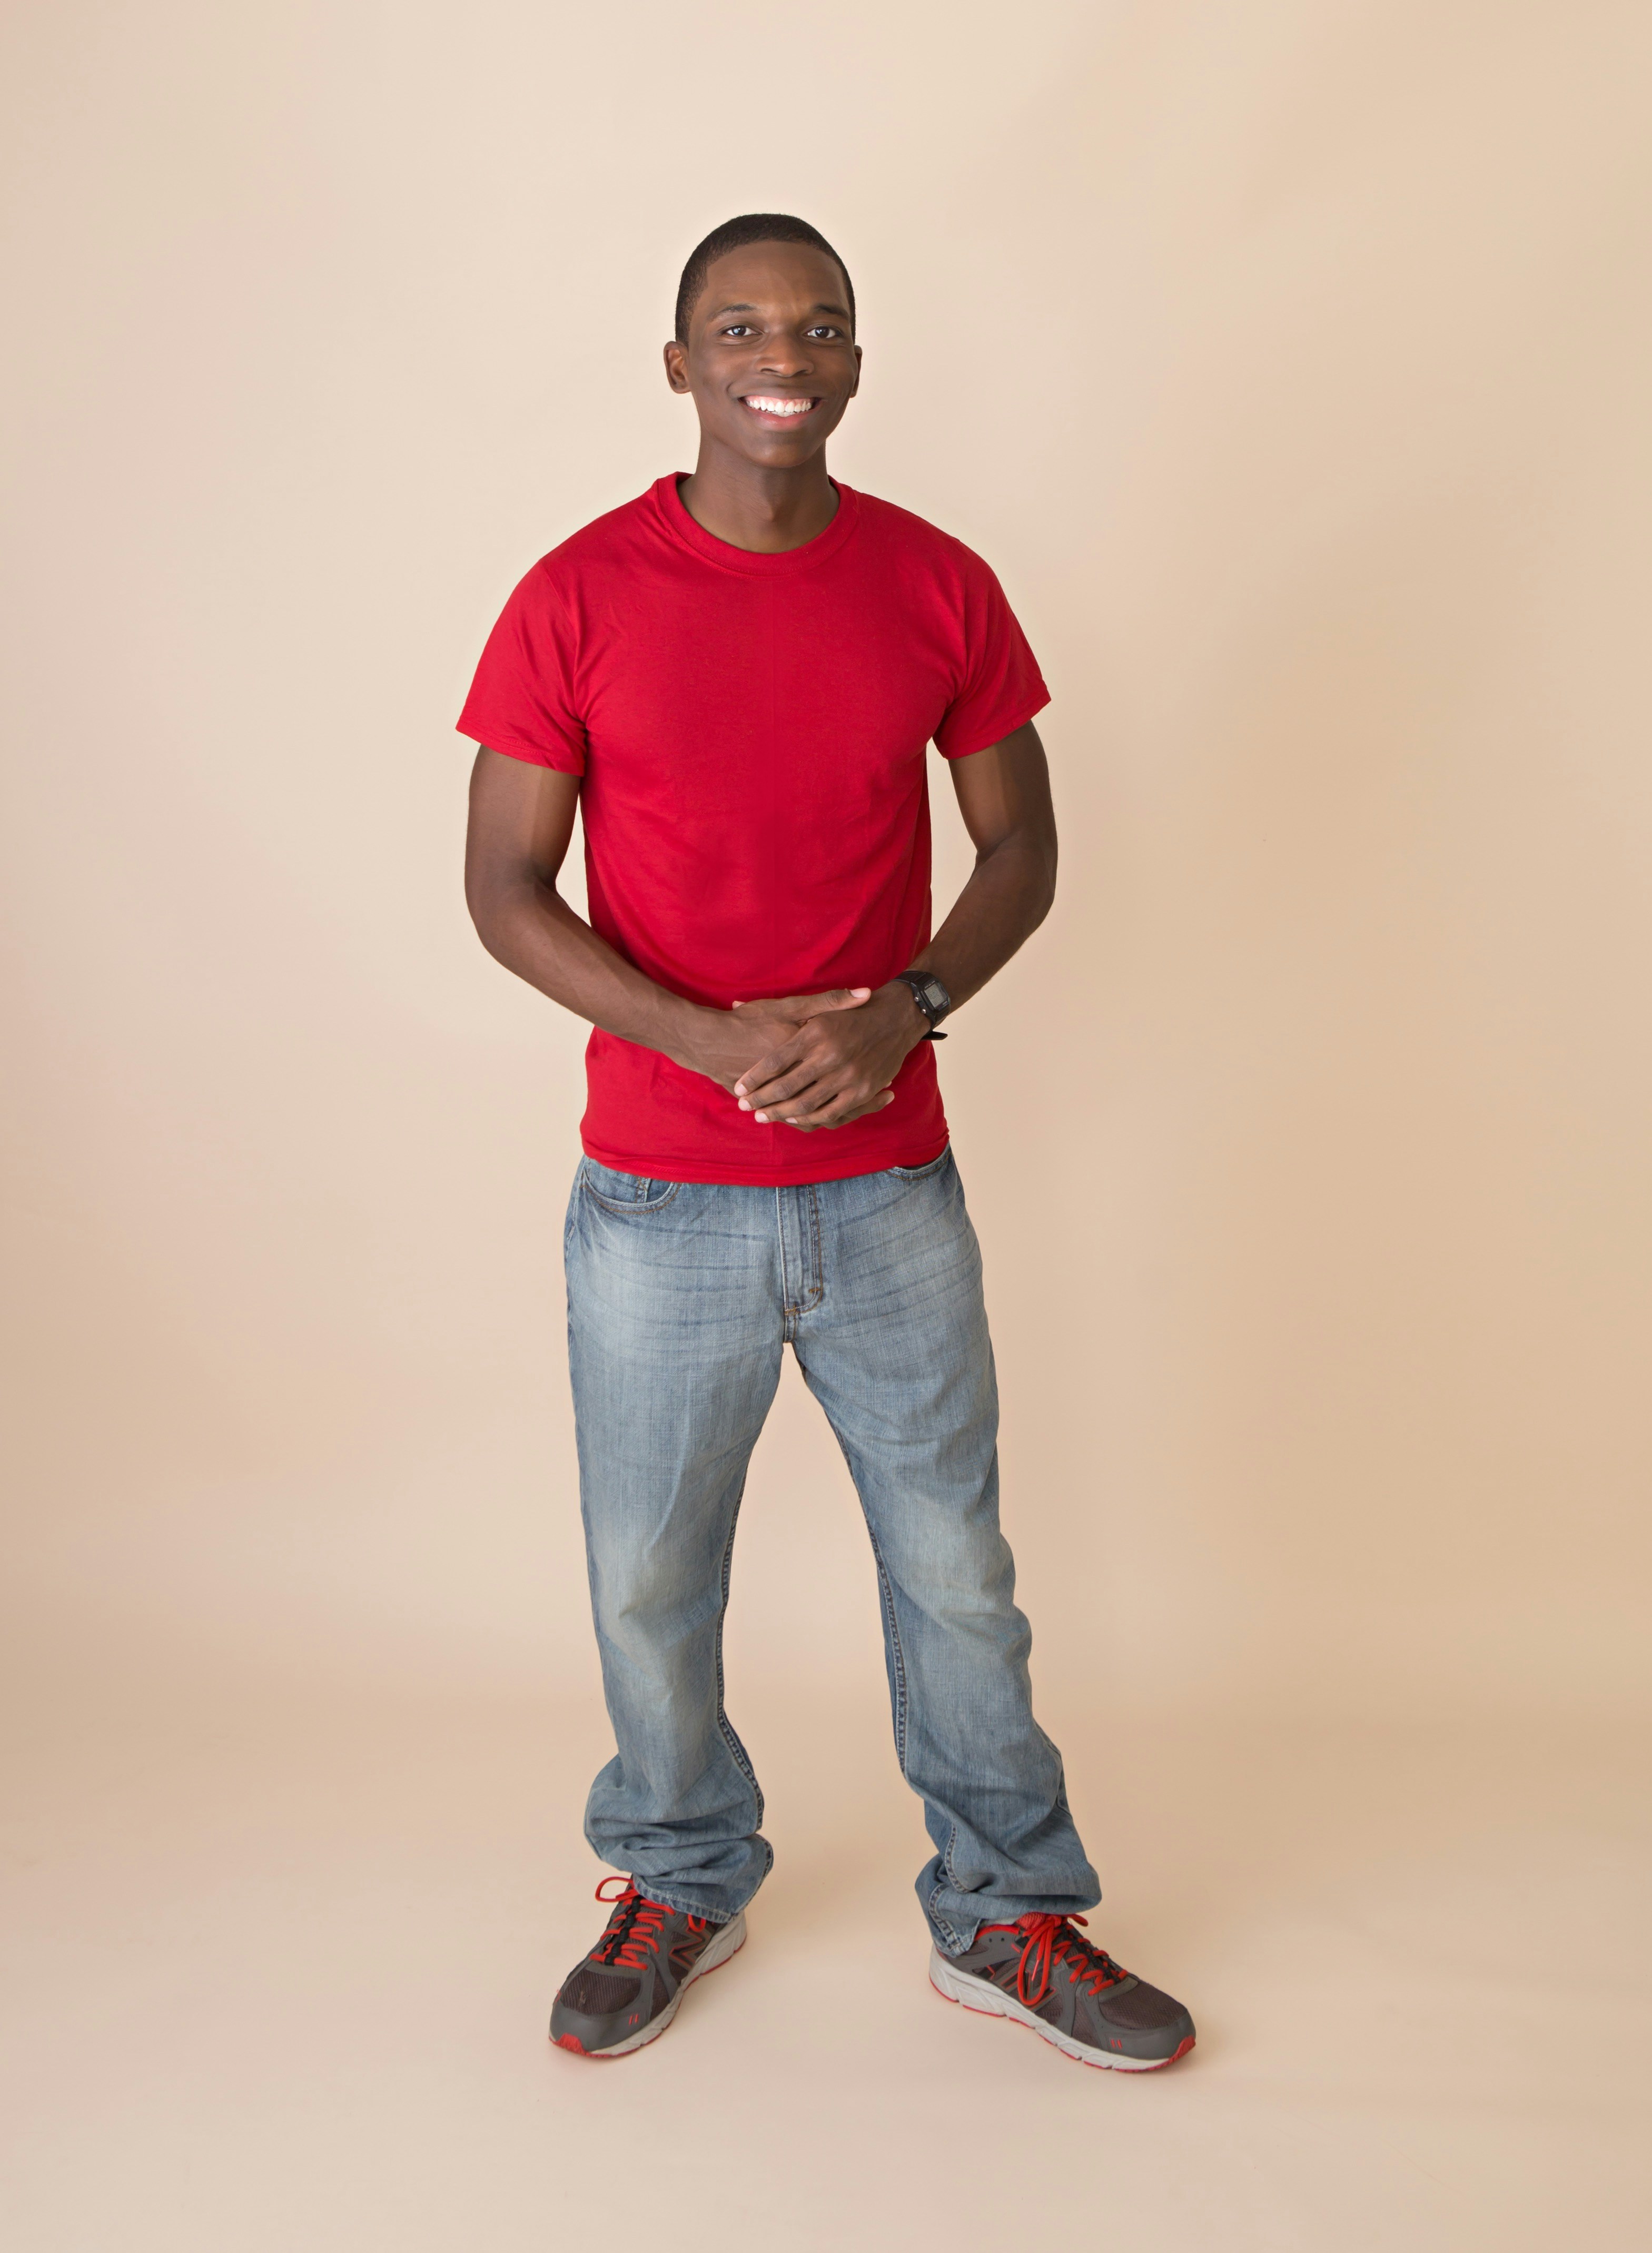 great photo recipe,how to photograph smiling man wearing red crew-neck t-shirt and gray denim jeans